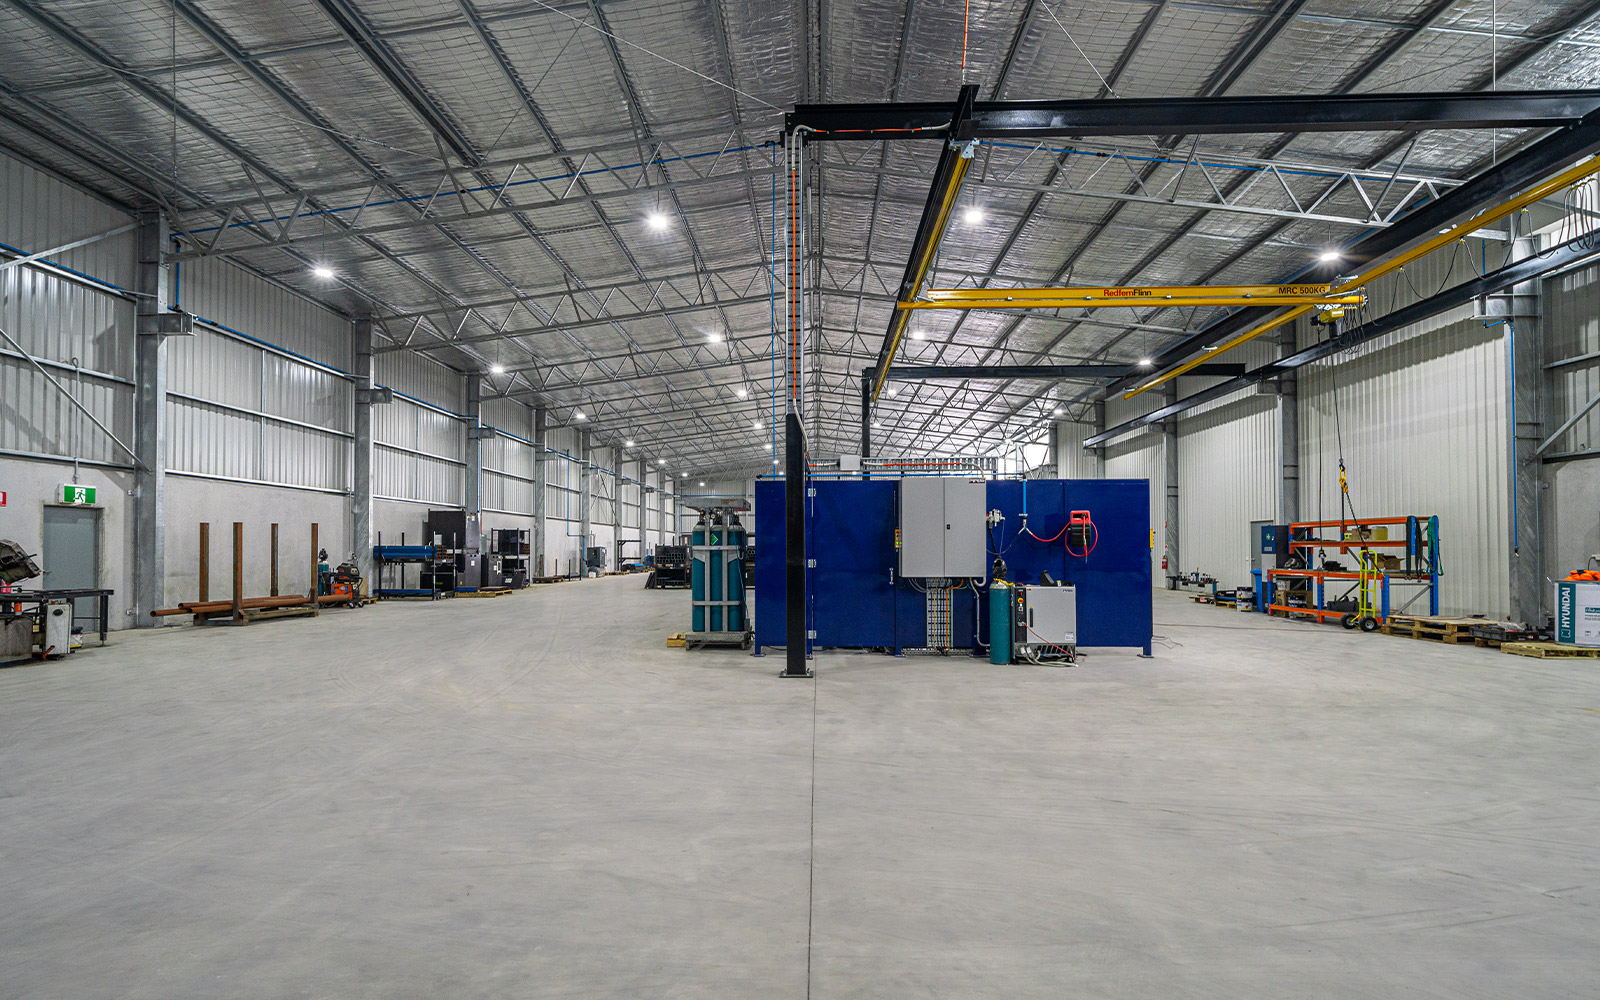 Kerfab Industries combined office and warehouse shed